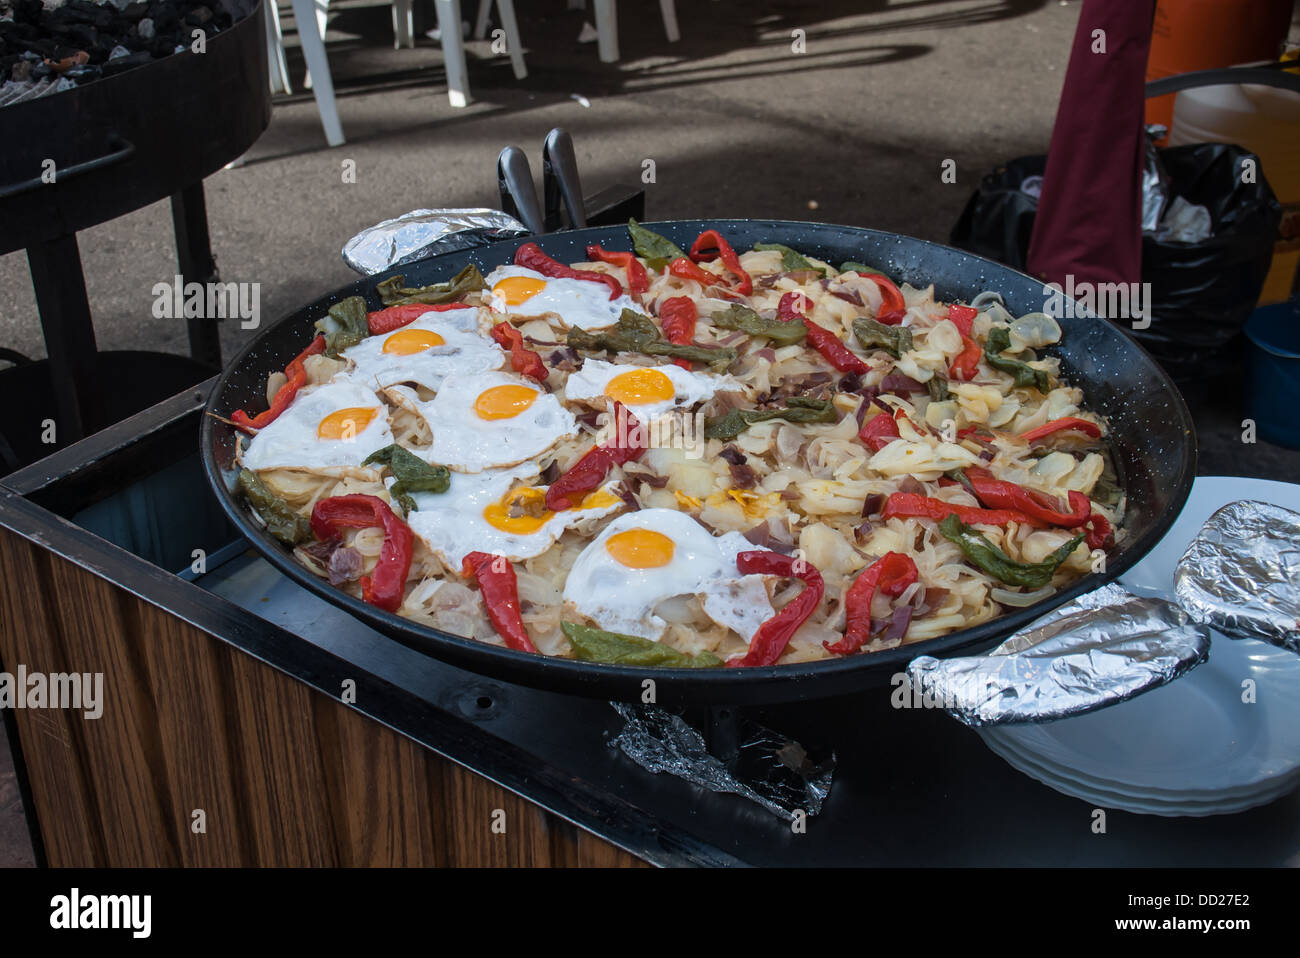 A typical lunch for the people attending the feria in Fuengirola, Spain. Stock Photo